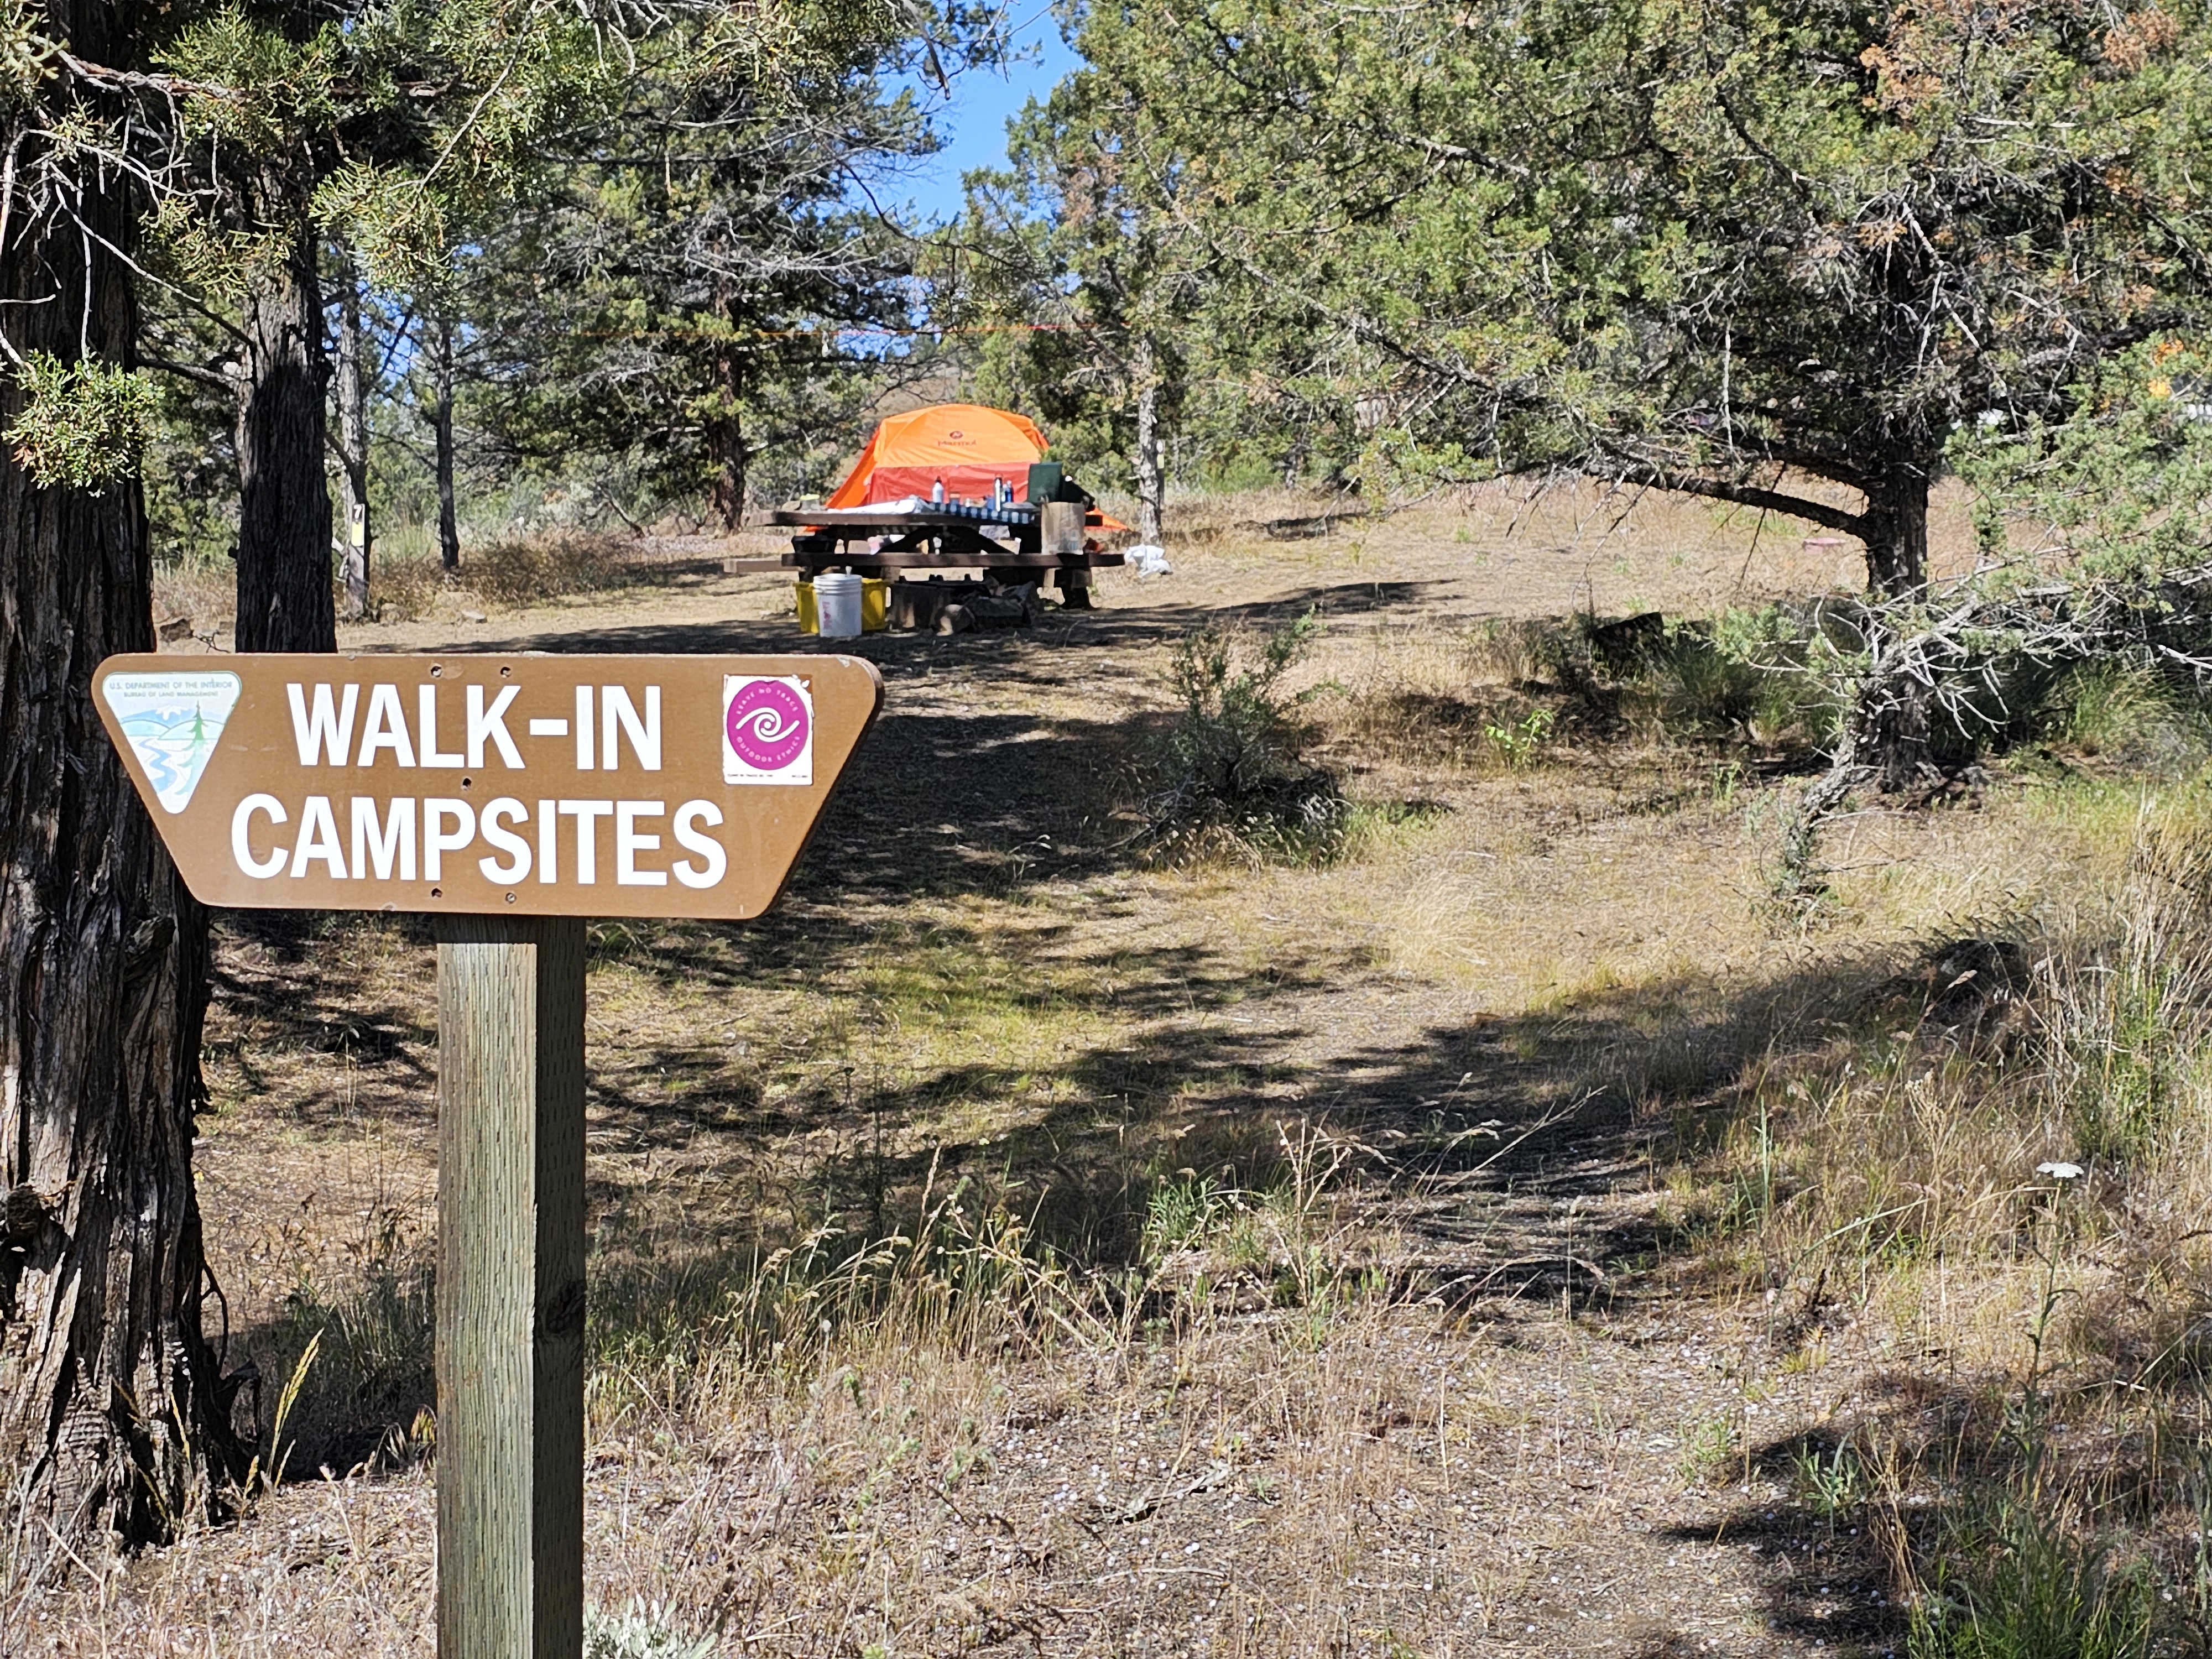 Trail to walk-in campsites at Muleshoe Campground